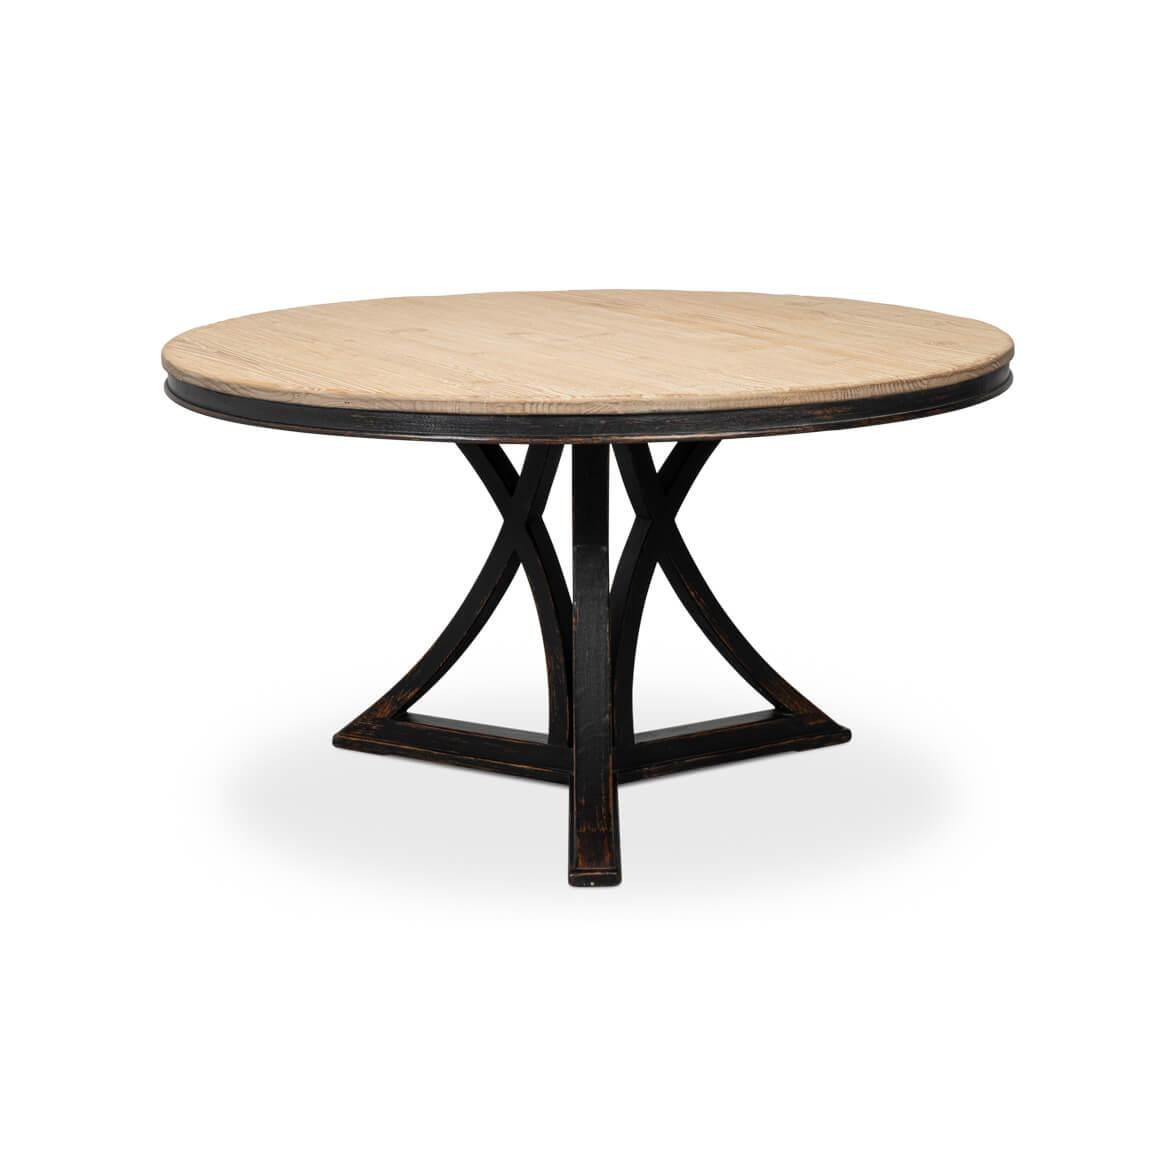 A perfect marriage of contemporary design and rustic flair. Measuring 54 inches in width and depth, and standing at 30 inches in height, this table offers ample space for intimate gatherings and family meals.

The table features a beautiful natural